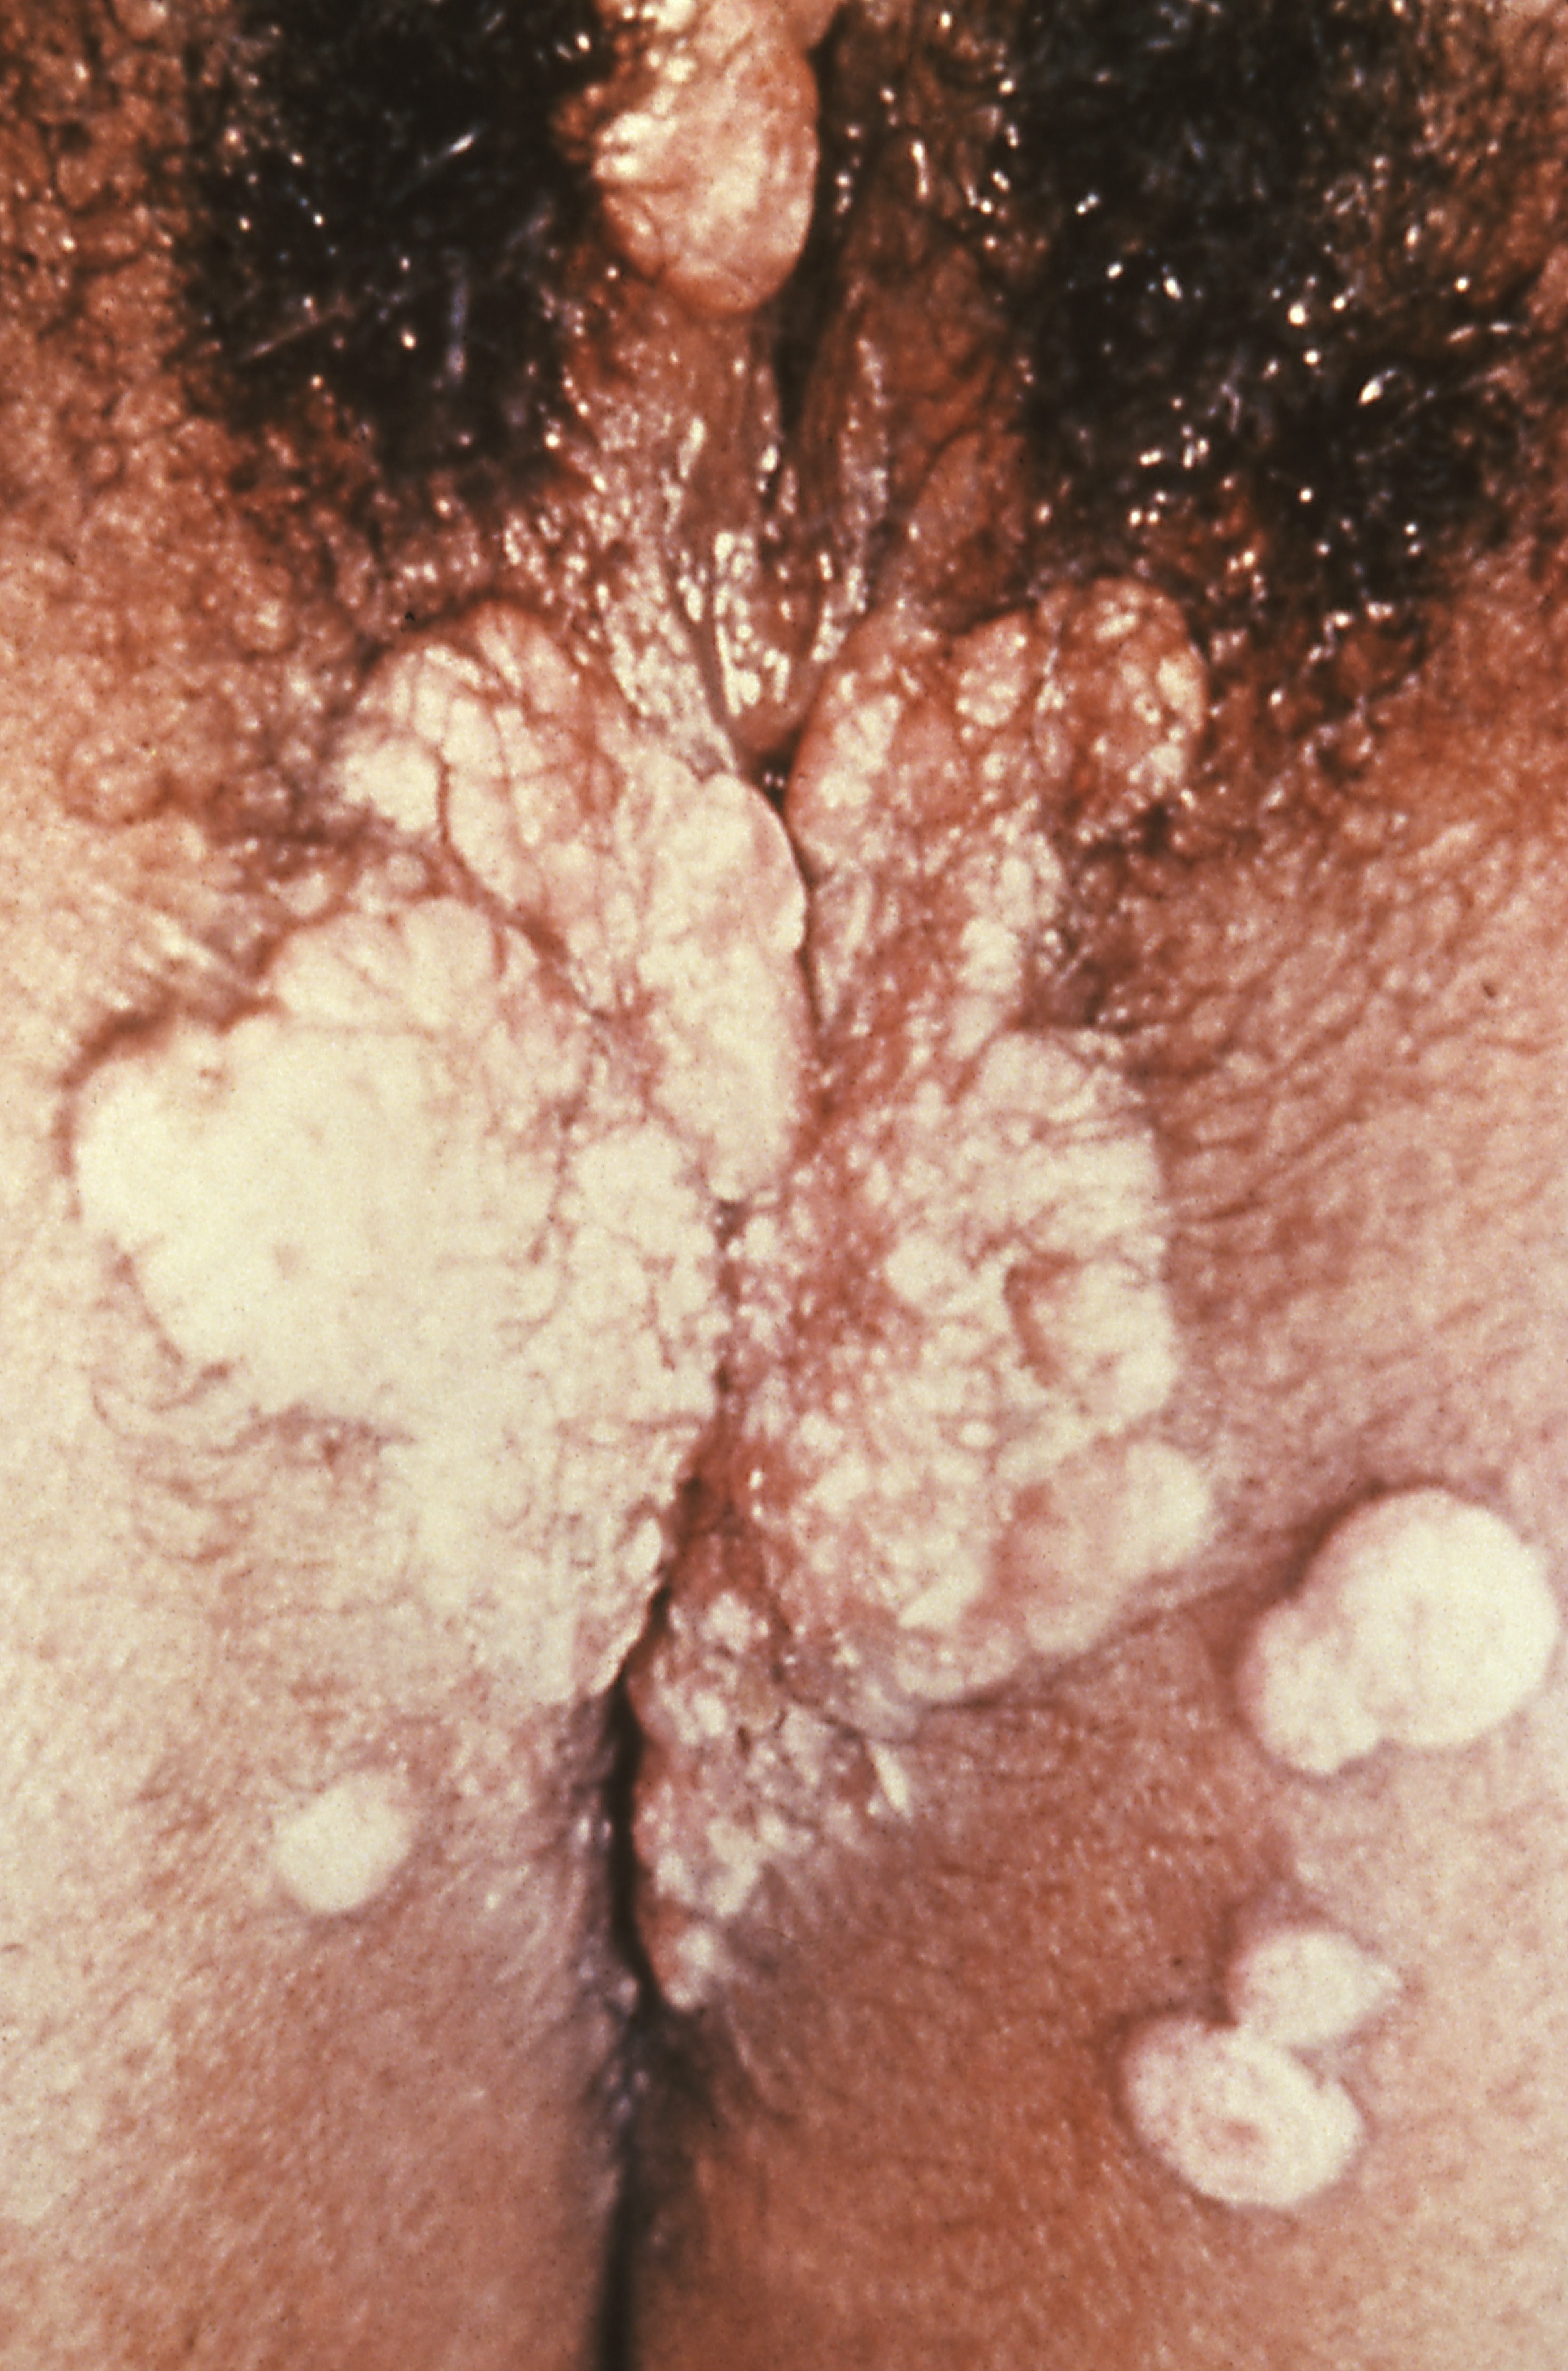 Secondary syphilis manifested perineal condylomata lata lesions, which presented as gray, raised papules that sometimes appear on the vulva or near the anus, or in any other warm intertriginous region.